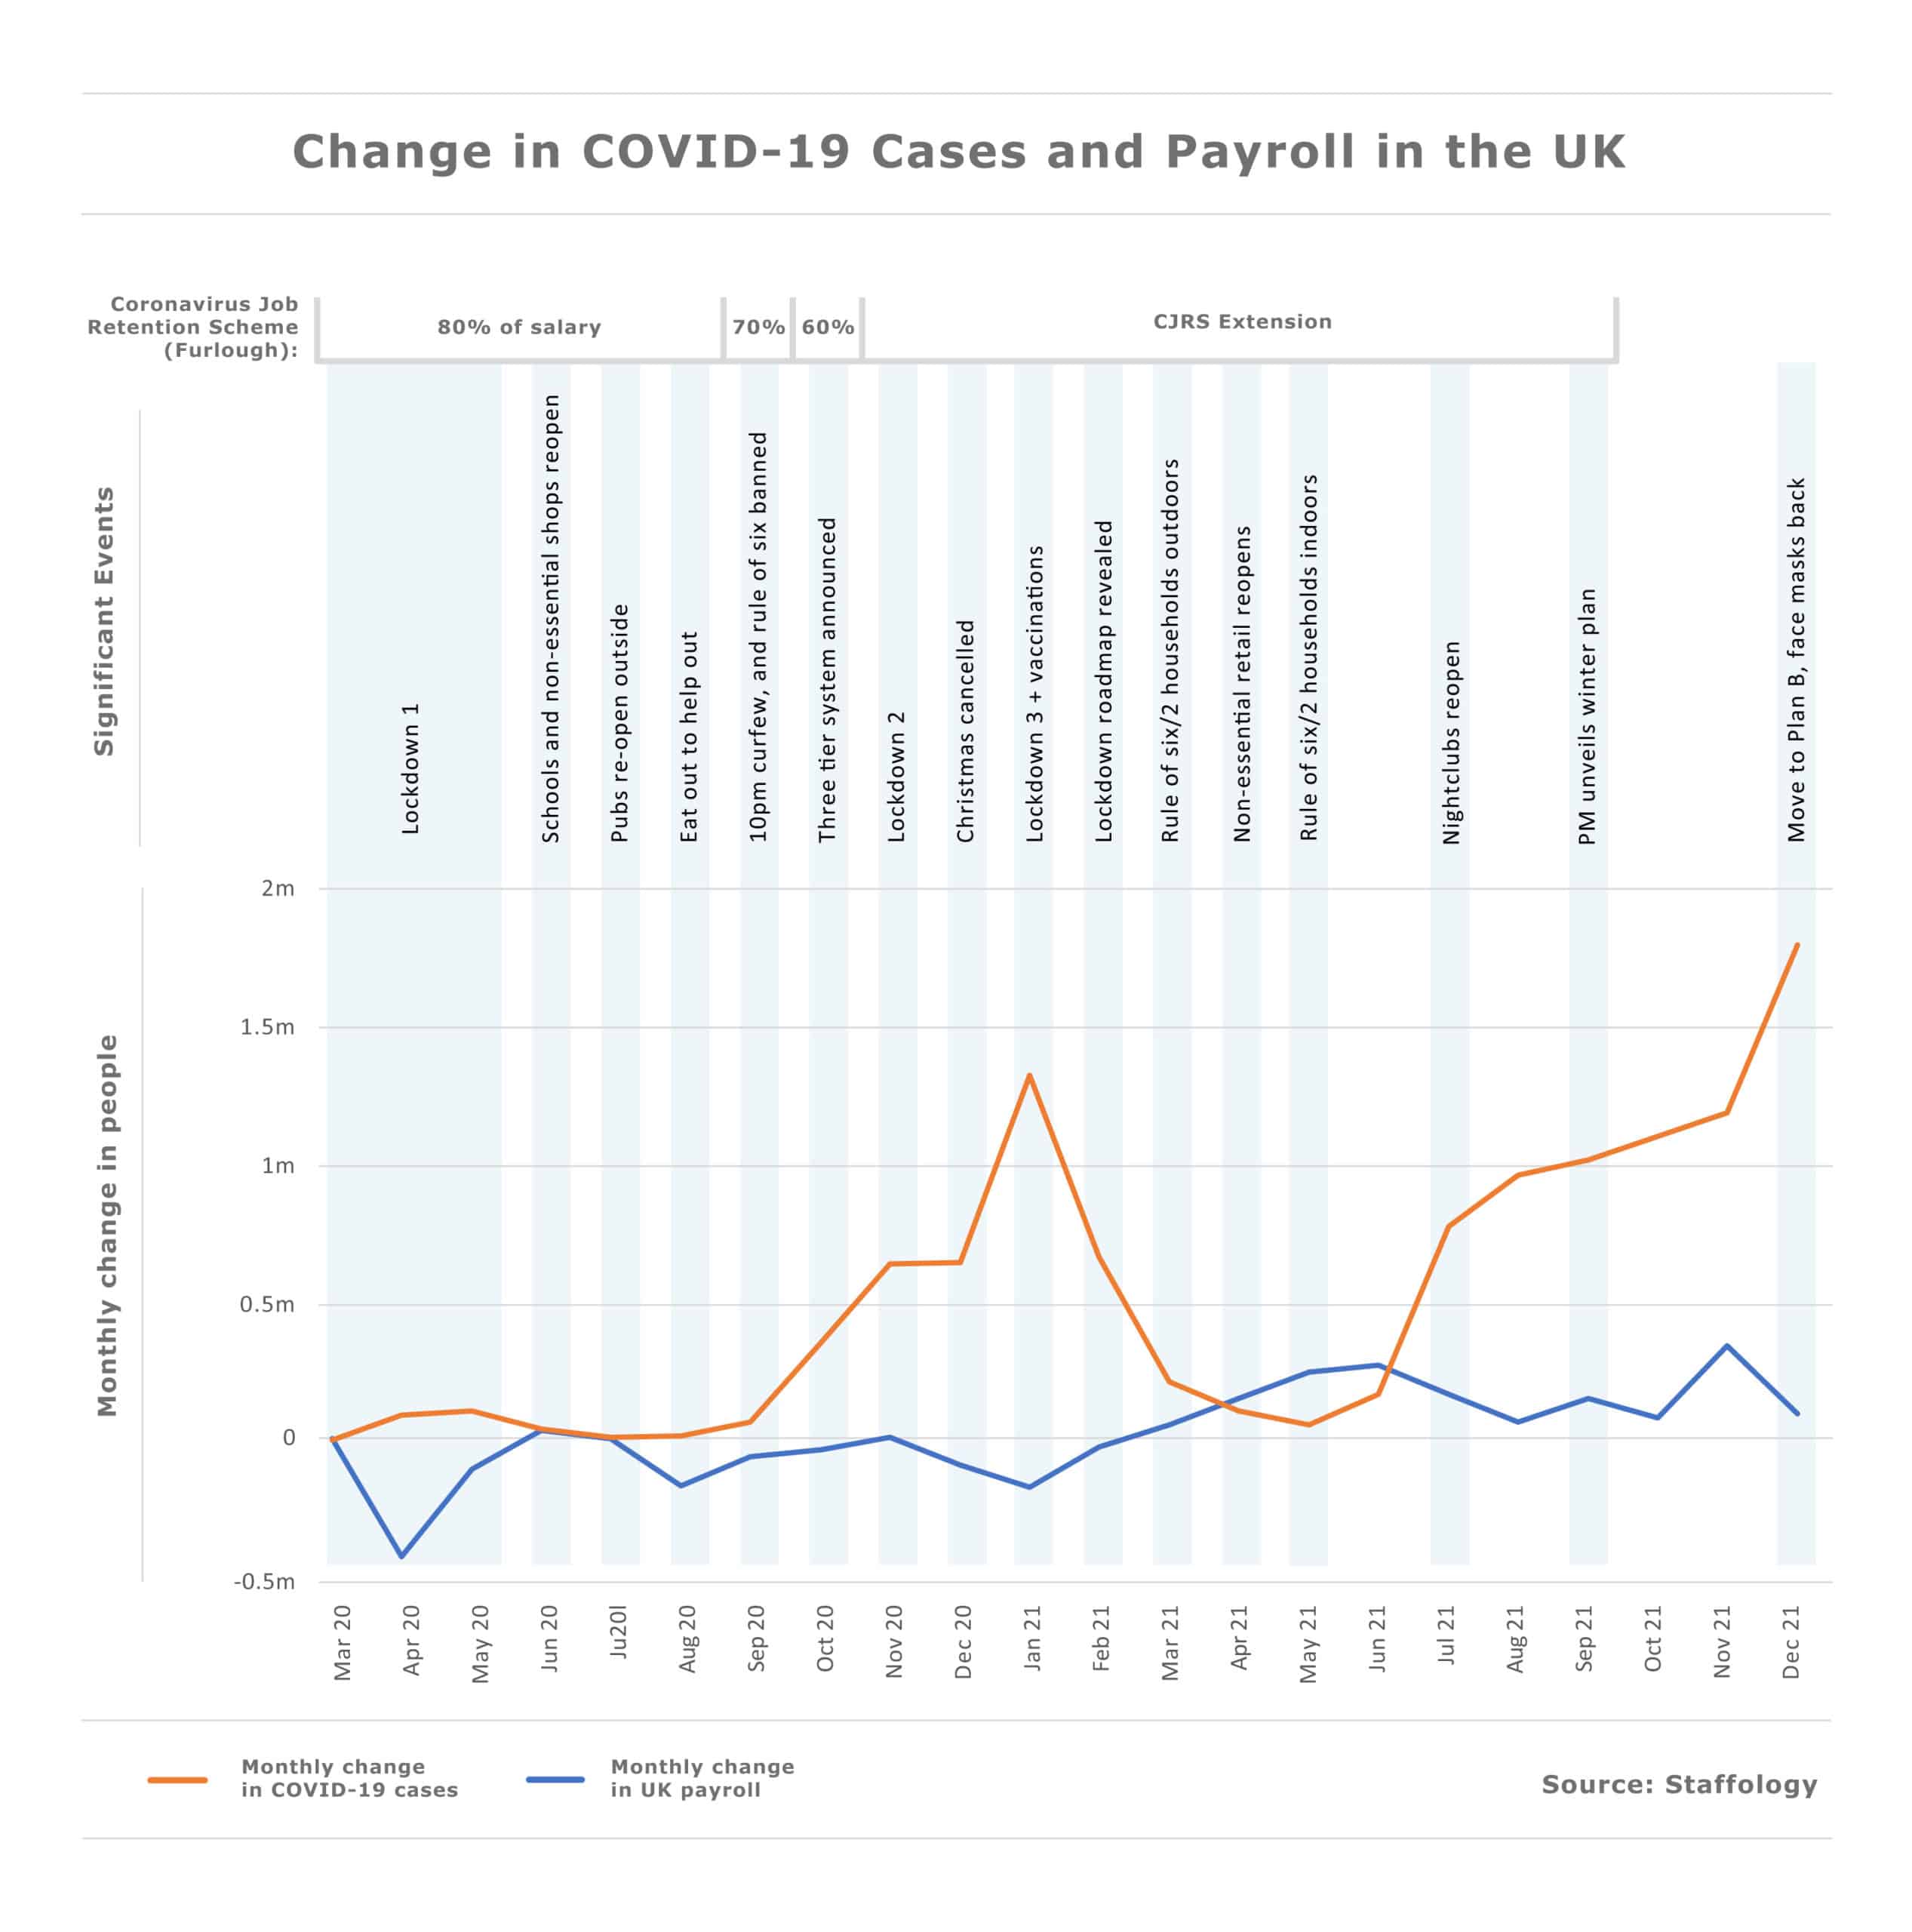 Graph showing Change in COVID-19 Cases and Payroll in the UK